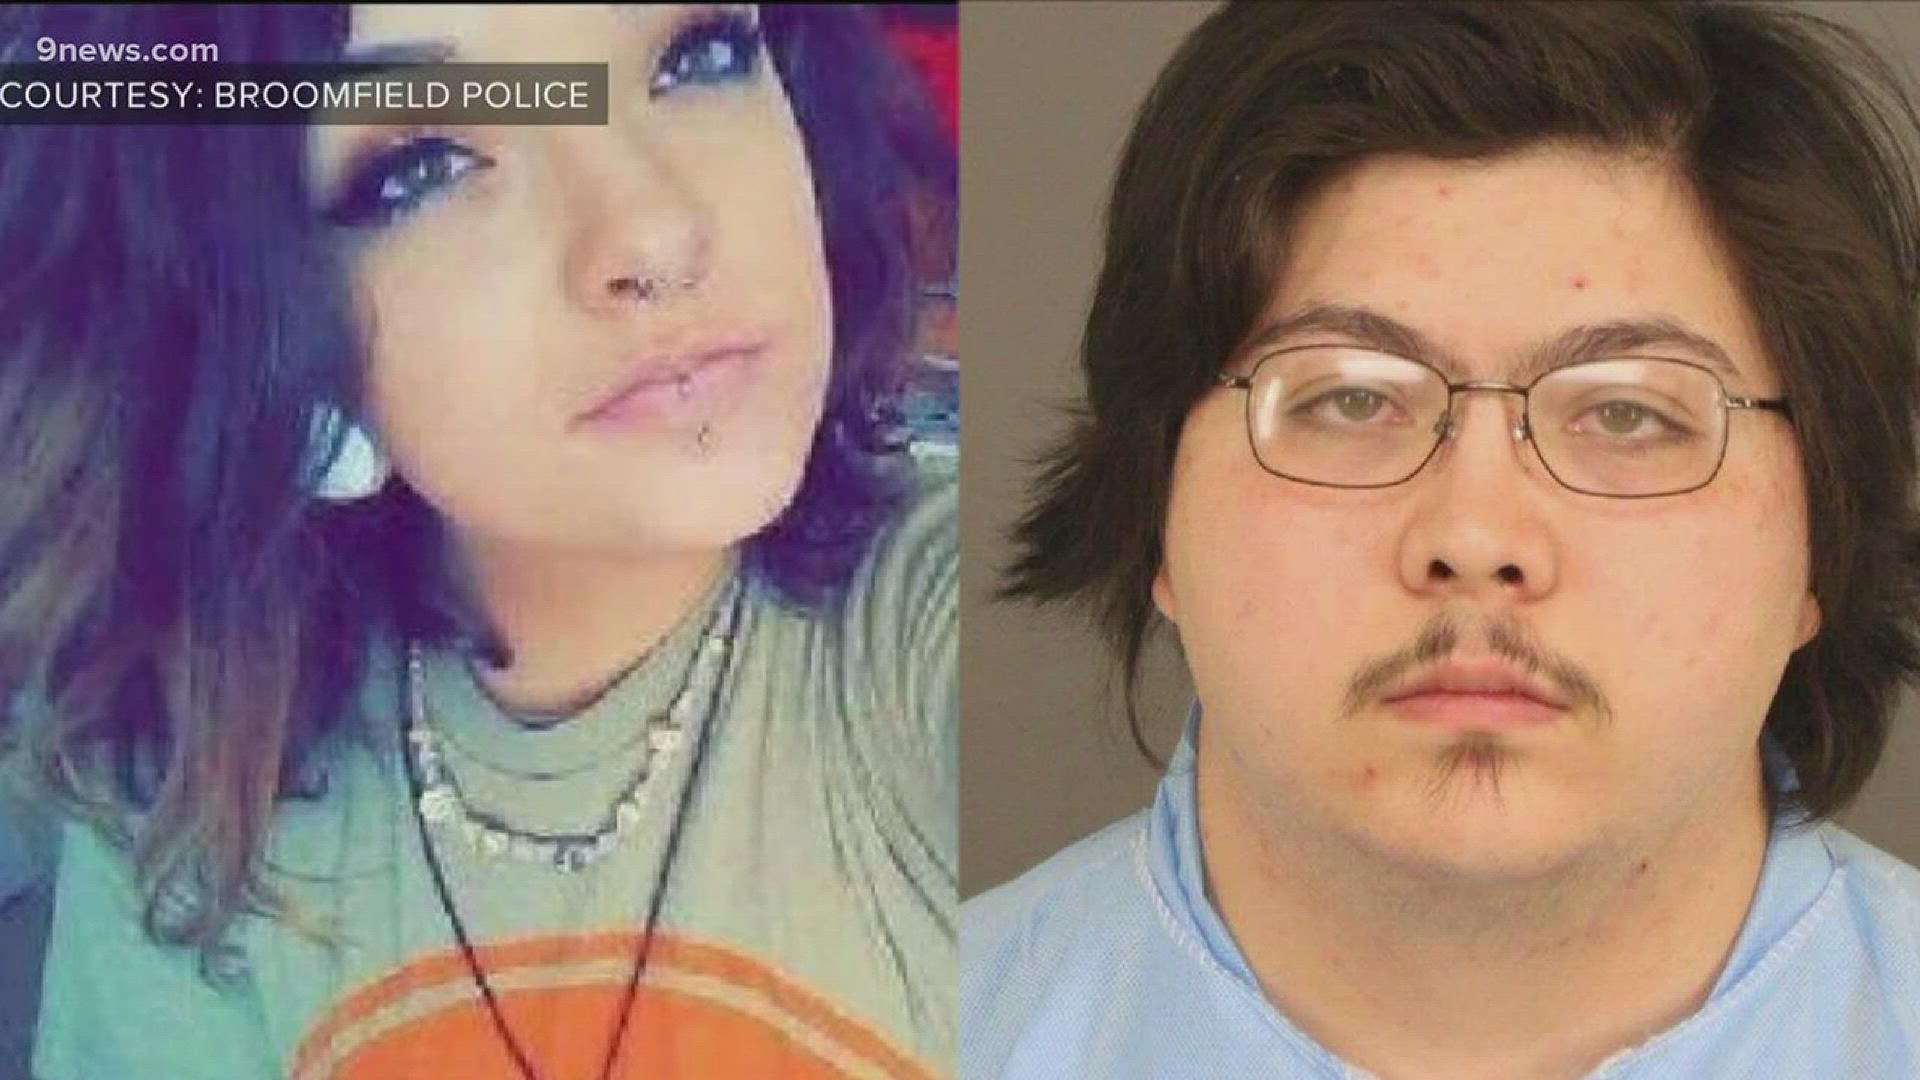 The man accused of shooting and killing a 19-year-old Broomfield woman agreed to plead guilty to second-degree murder at a disposition hearing Monday morning. Joseph Lopez, 23, told investigators that he shot Natalie Bollinger after responding to an ad s